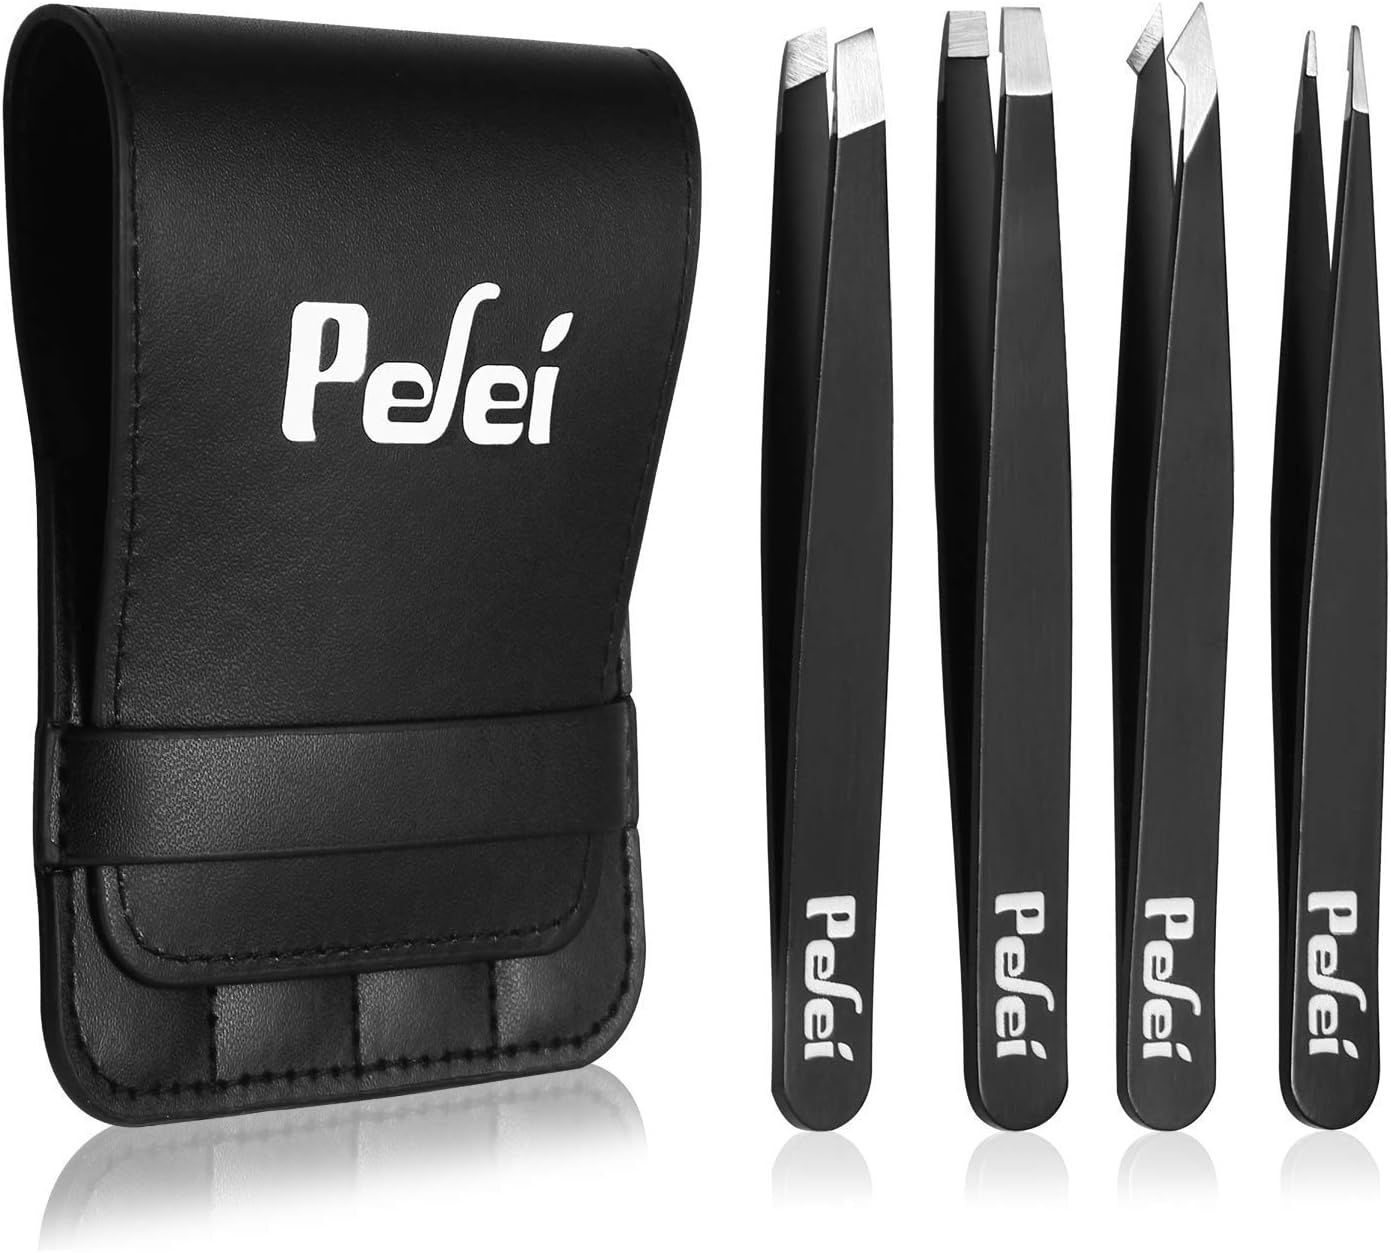 Pefei Tweezers Set - Professional Stainless Steel Tweezers for Eyebrows - Great Precision for Fac... | Amazon (US)